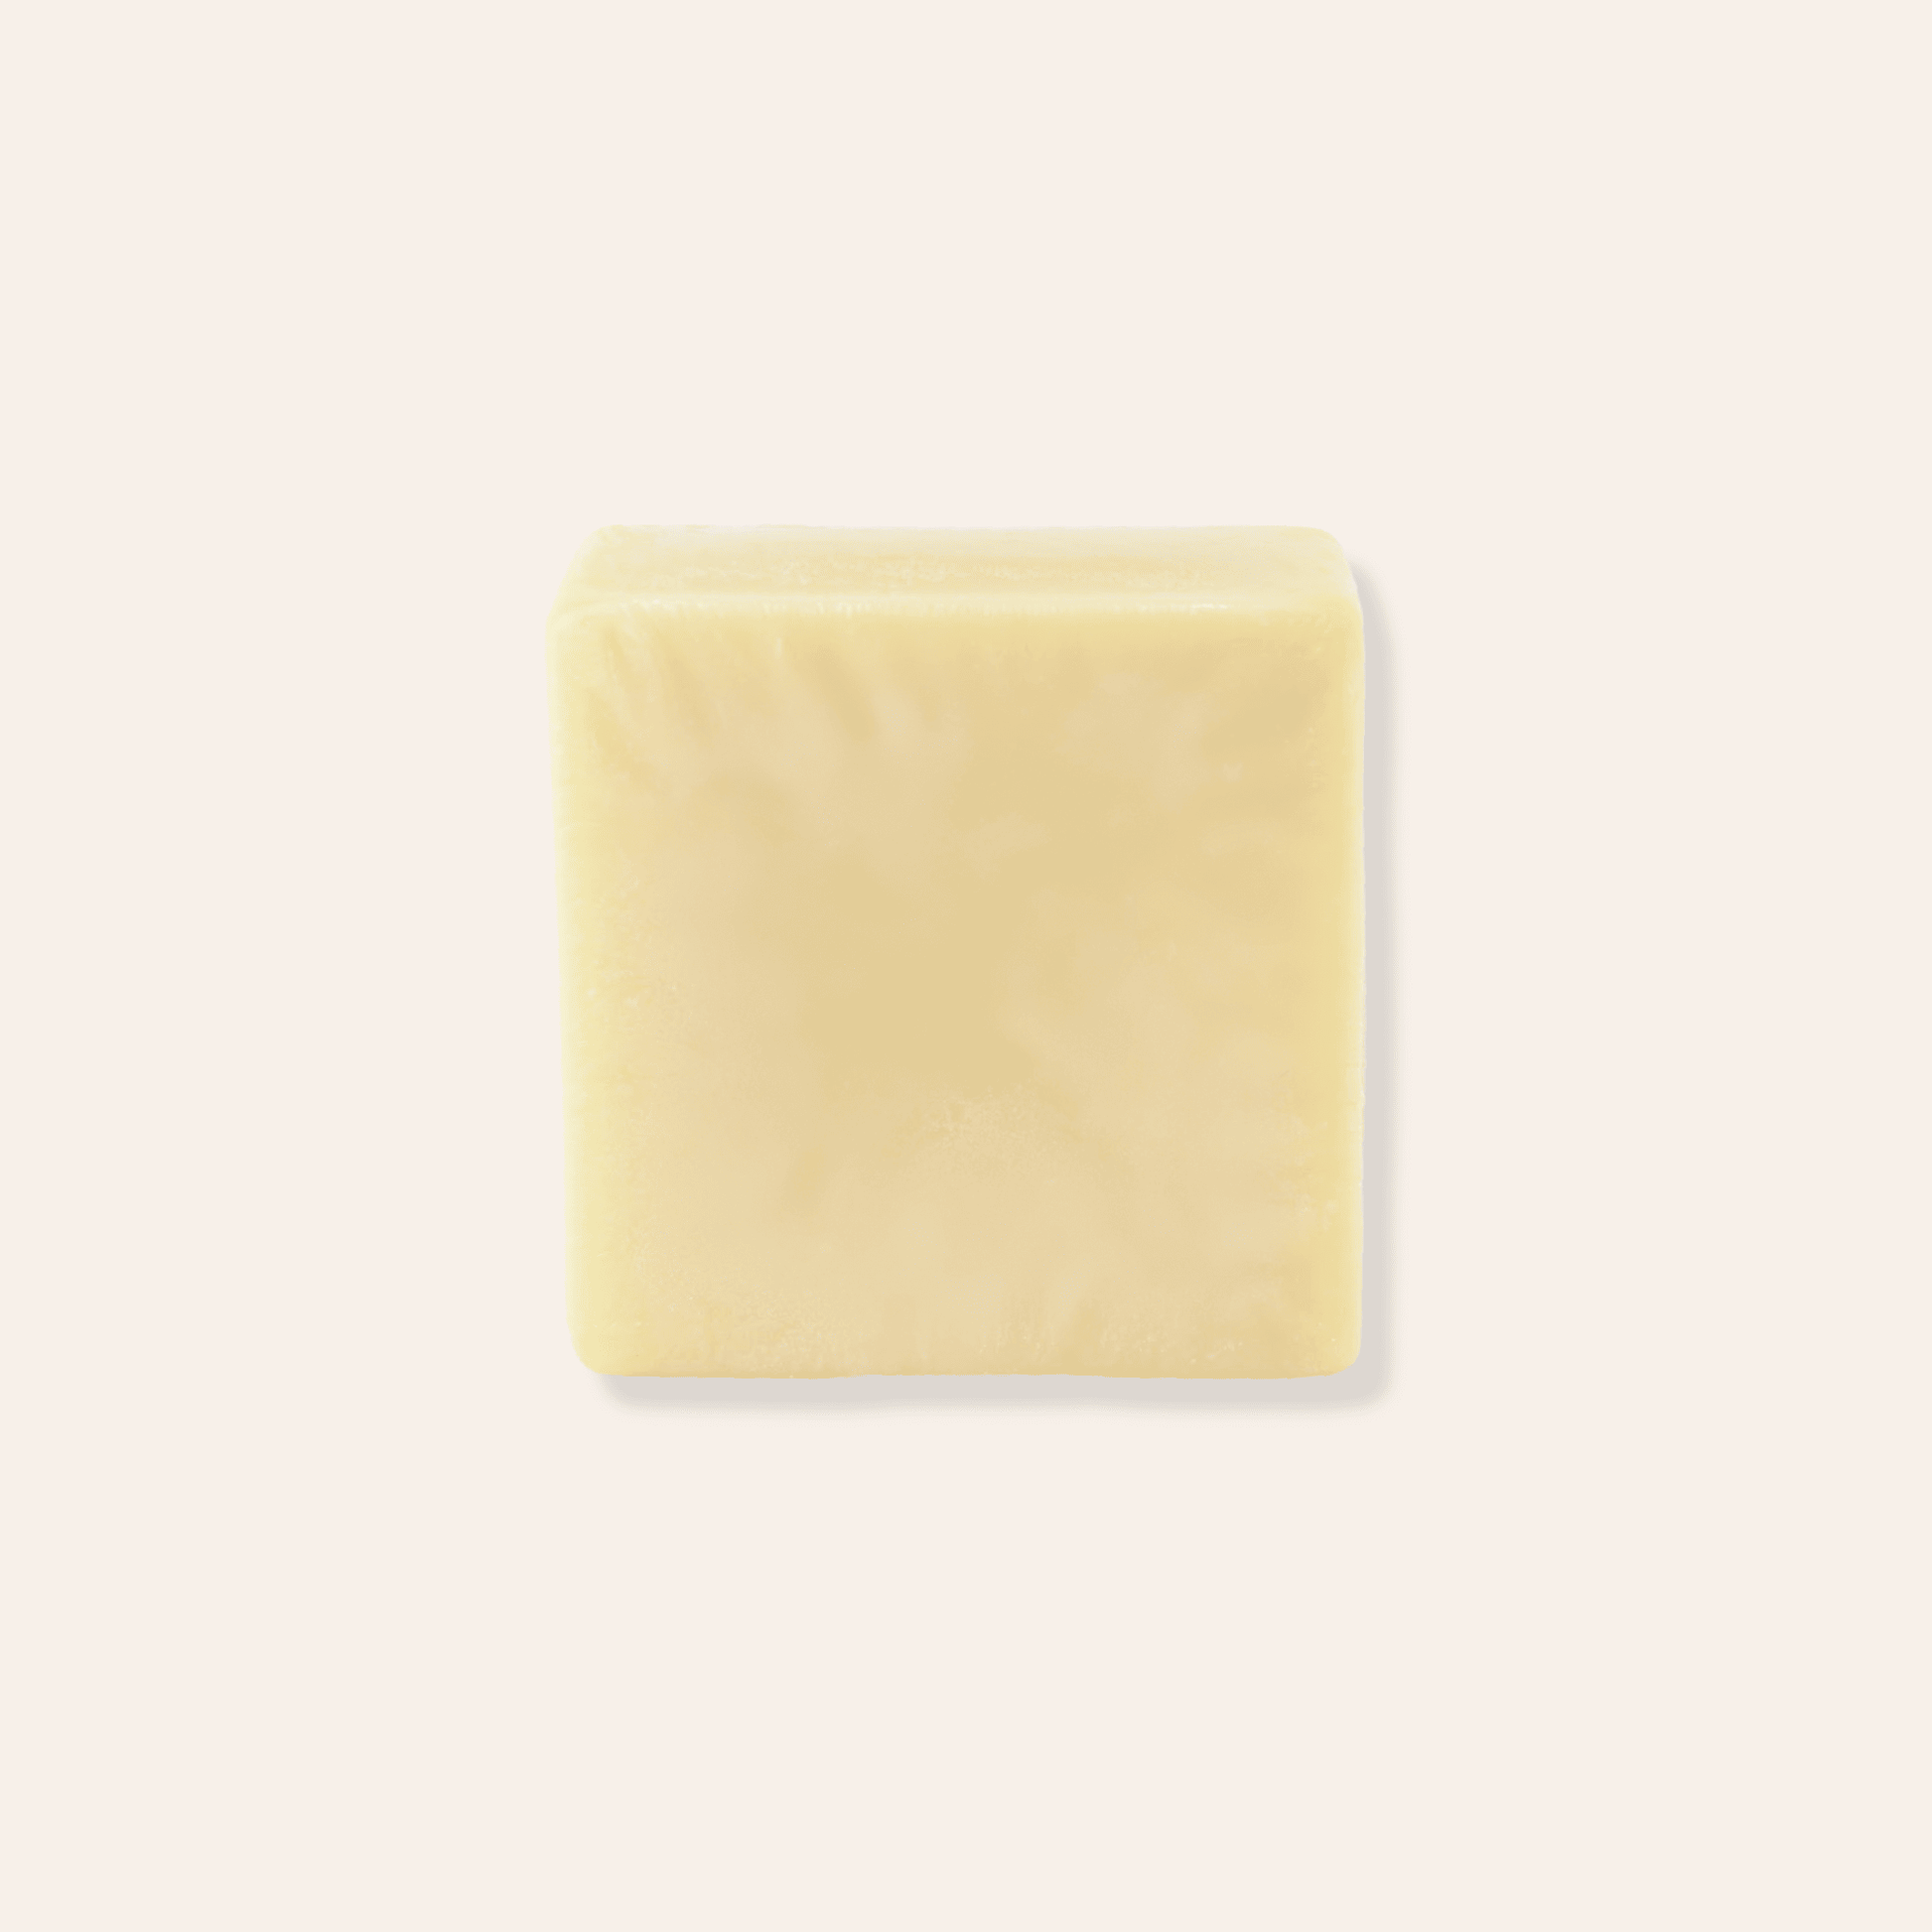 A yellow solid conditioner bar in front of a black box with a kraft label.